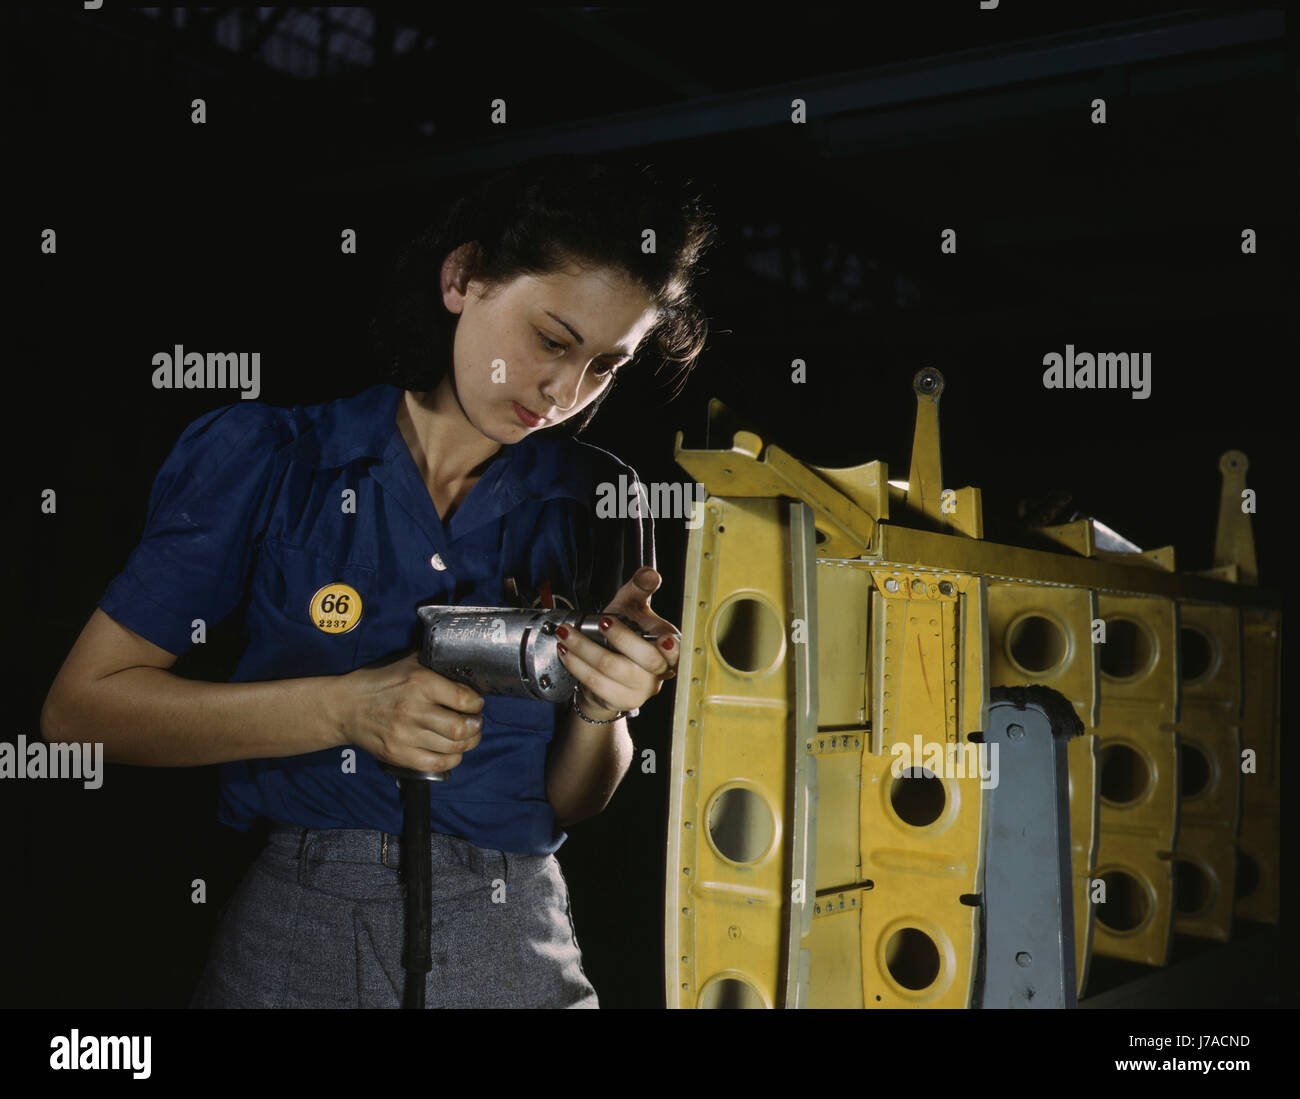 Woman drilling horizontal stabilizers on an A-31 Vengeance bomber plane, 1943. Stock Photo